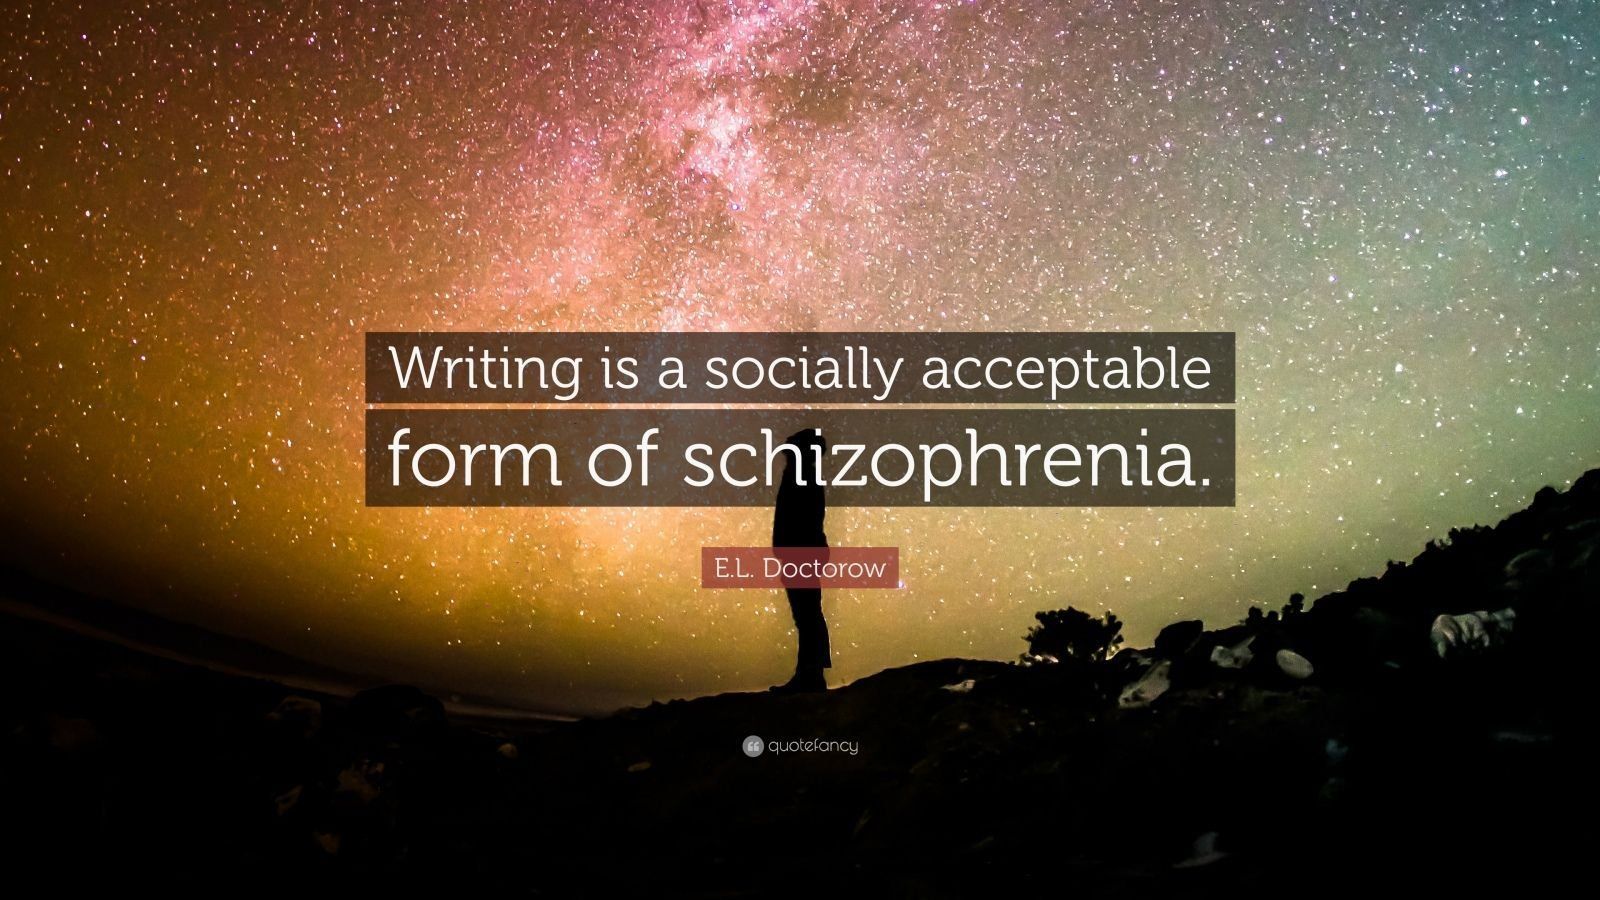 Writing is a socially acceptable form of schizophrenia.”